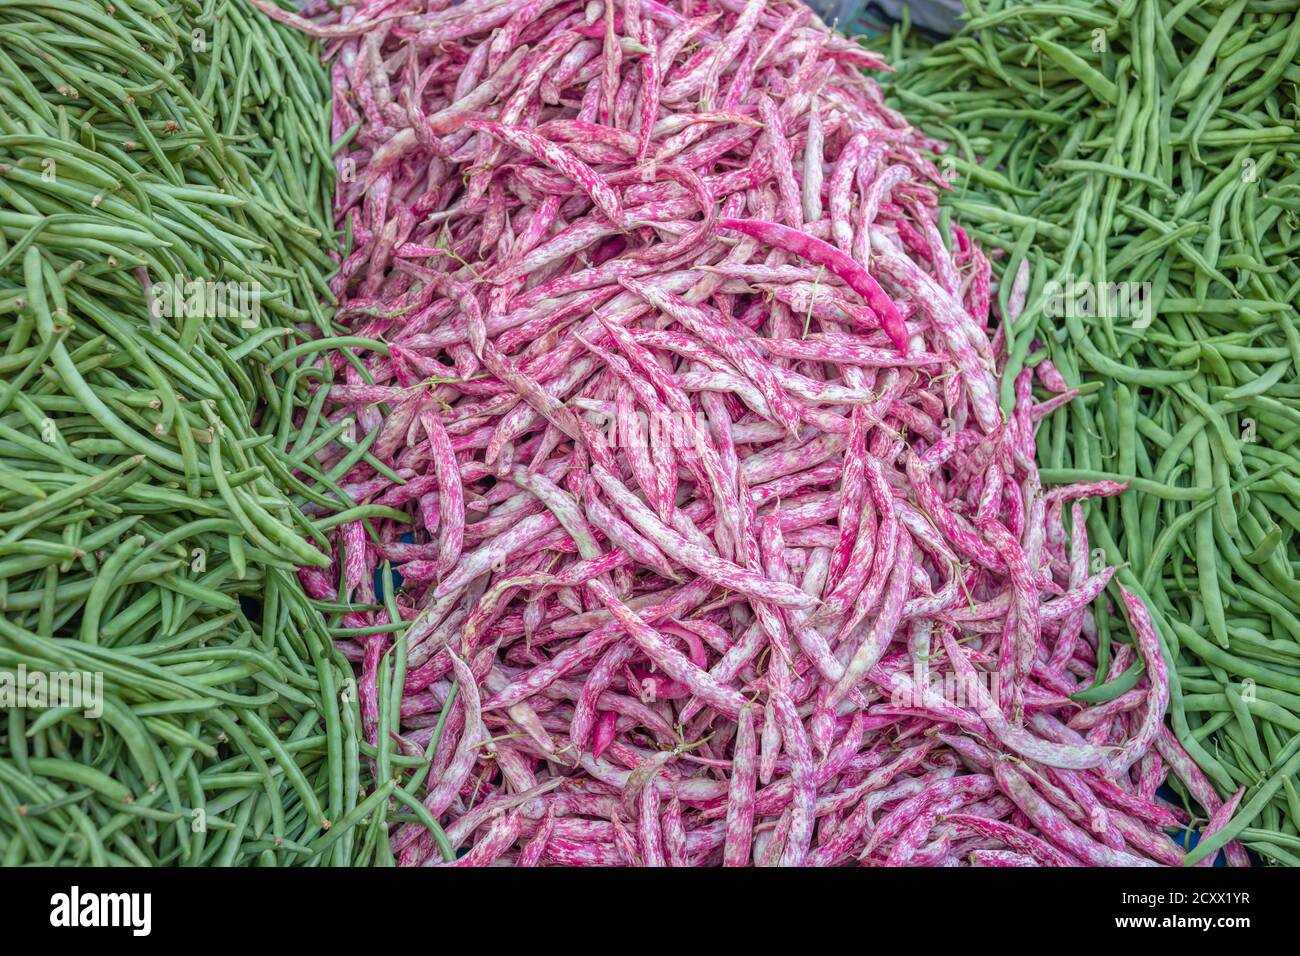 Pink and green colored string beans background. Vegetarian food